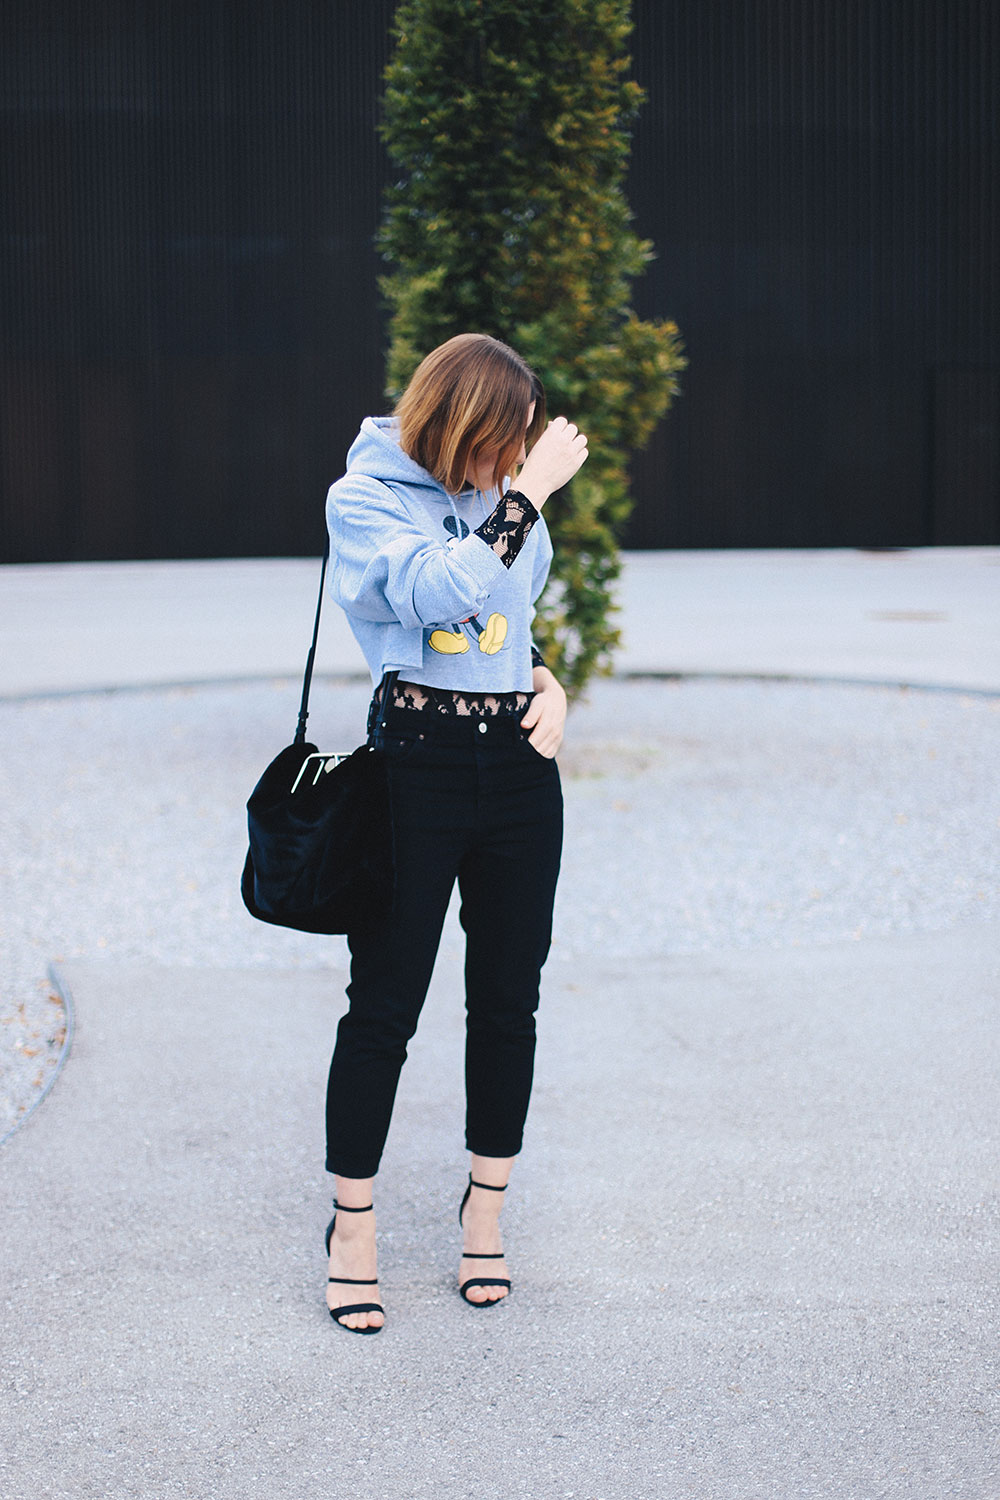 Cropped Mickey Mouse Pullover, Spitzenbody, Mom Jeans, Tasche aus Webpelz, cropped Kapuzenpullover, Streetstyle, Fashion Blog, Mode Blog, whoismocca.com